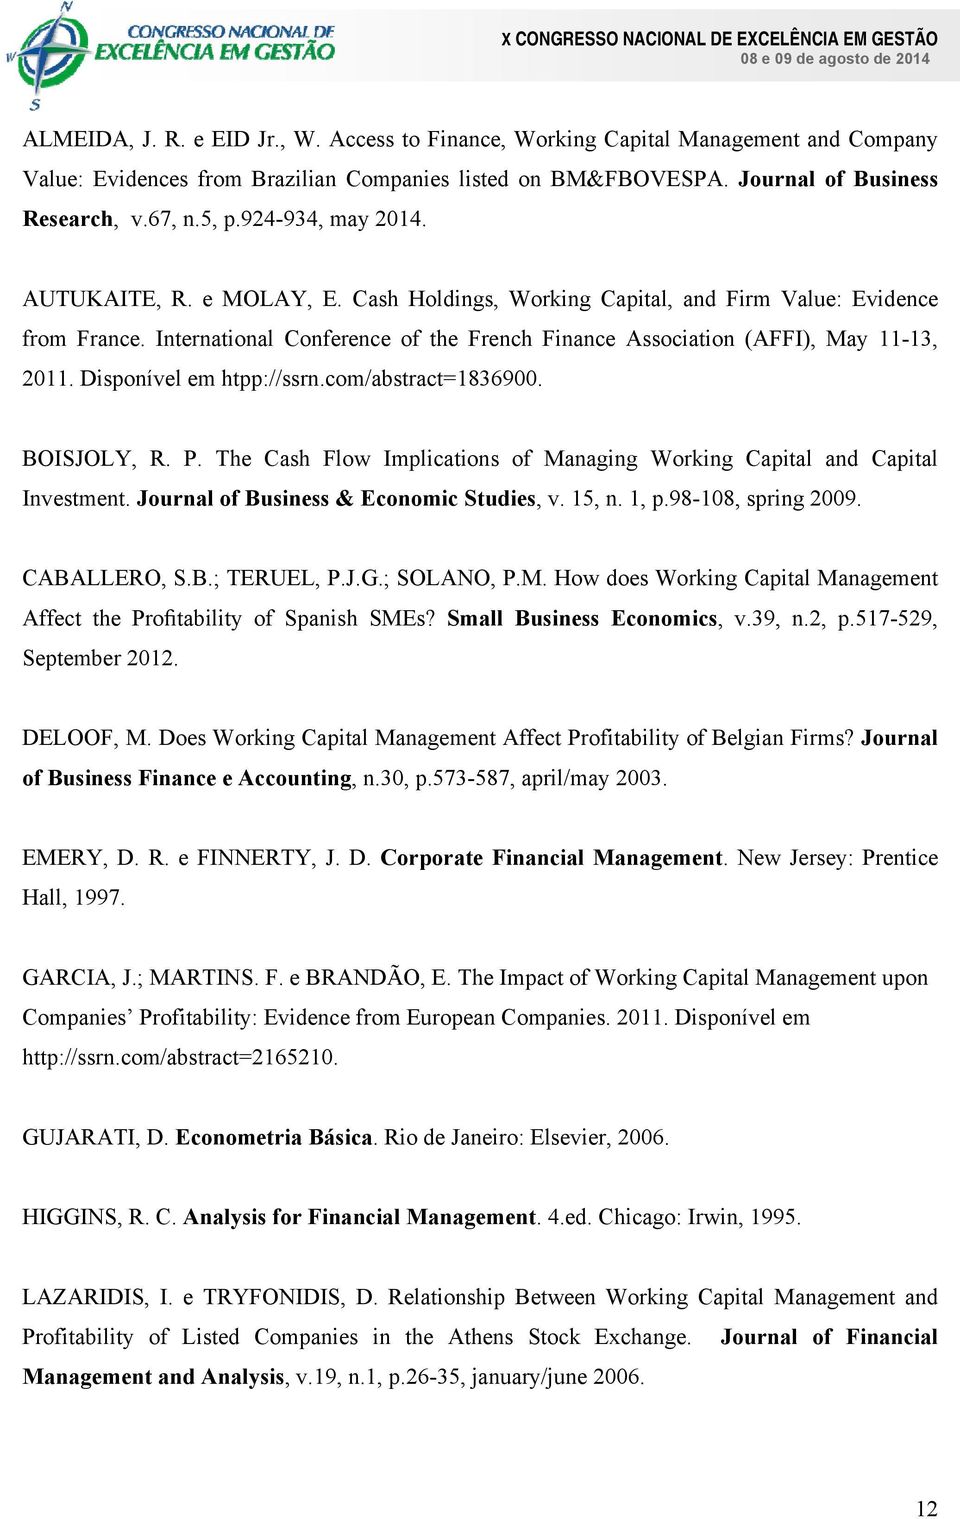 Disponível em htpp://ssrn.com/abstract=1836900. BOISJOLY, R. P. The Cash Flow Implications of Managing Working Capital and Capital Investment. Journal of Business & Economic Studies, v. 15, n. 1, p.